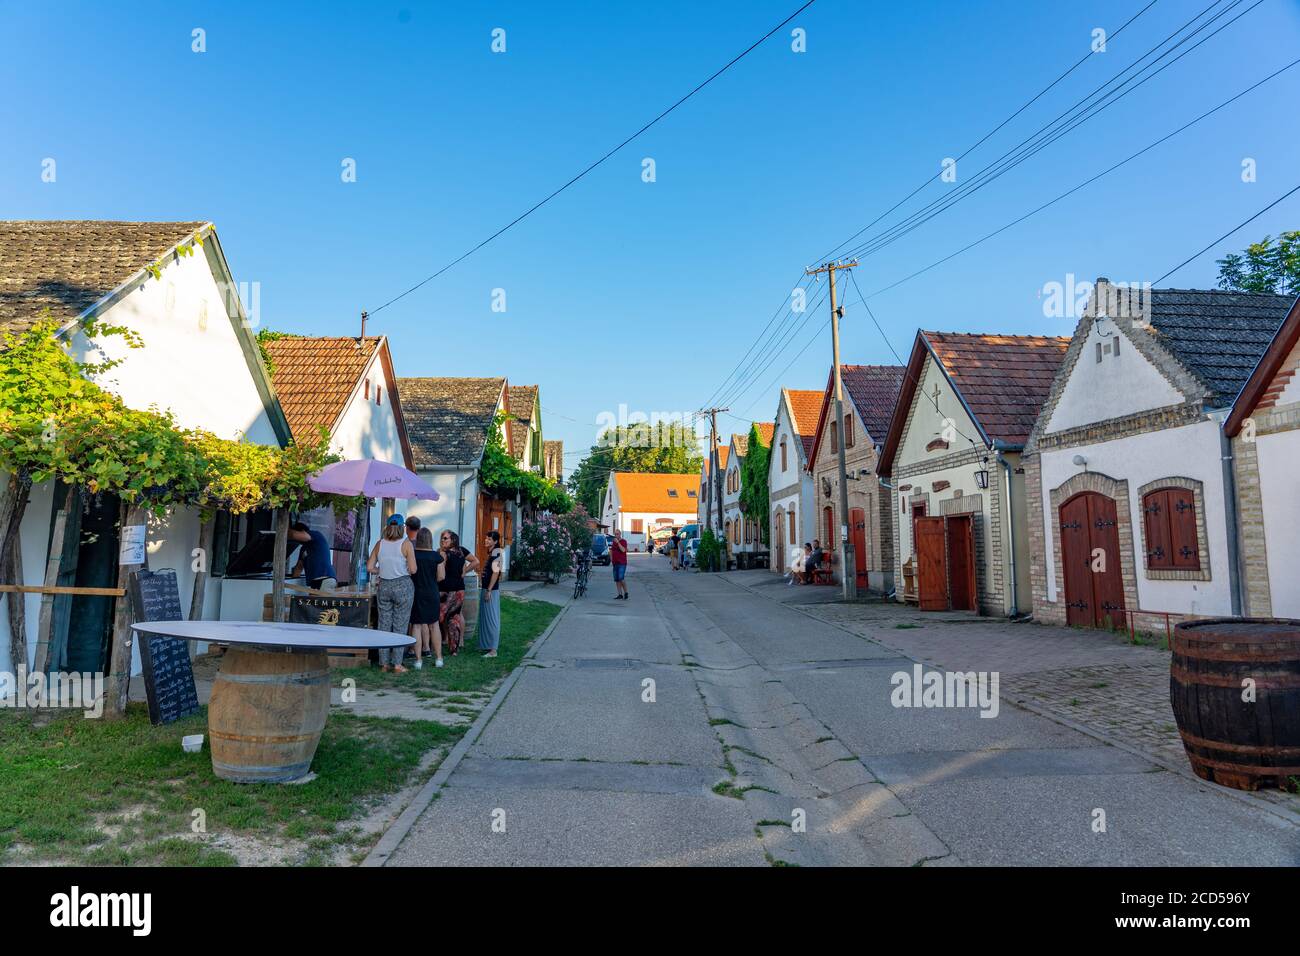 Hajos, Hungary - 08.21.2020: architecture of the Hajos Baja wine region which is famous for the museal colorful cellar village of Hajos with 1200 Stock Photo